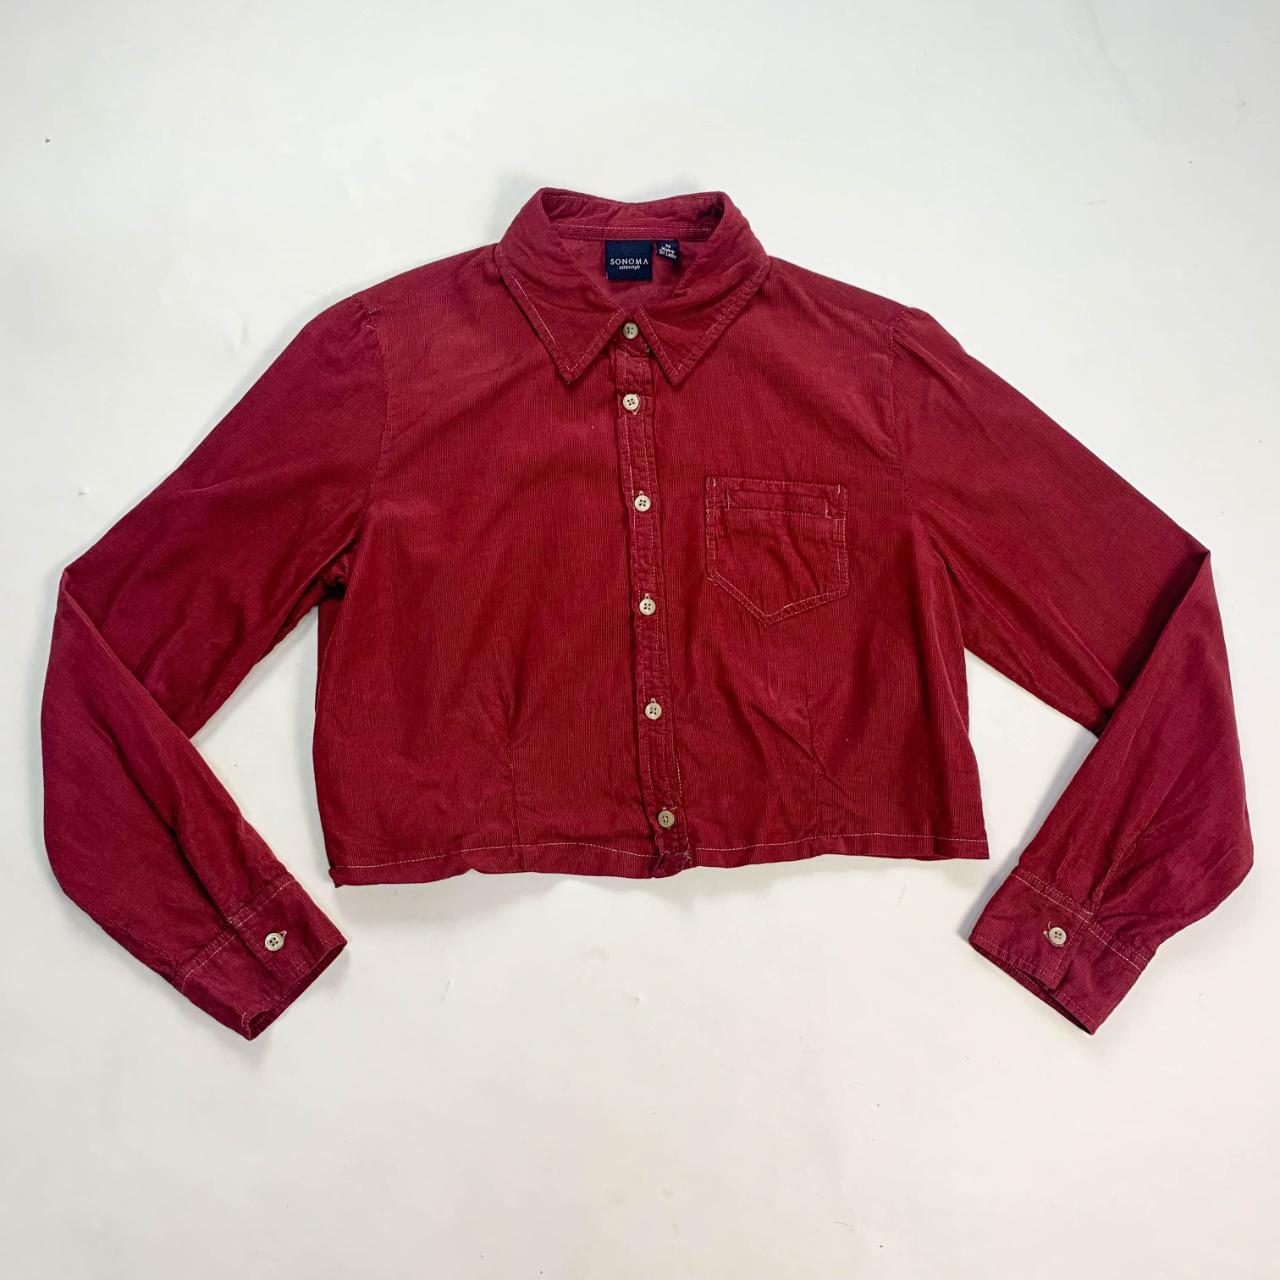 Unbranded Women's Red and Burgundy Shirt | Depop